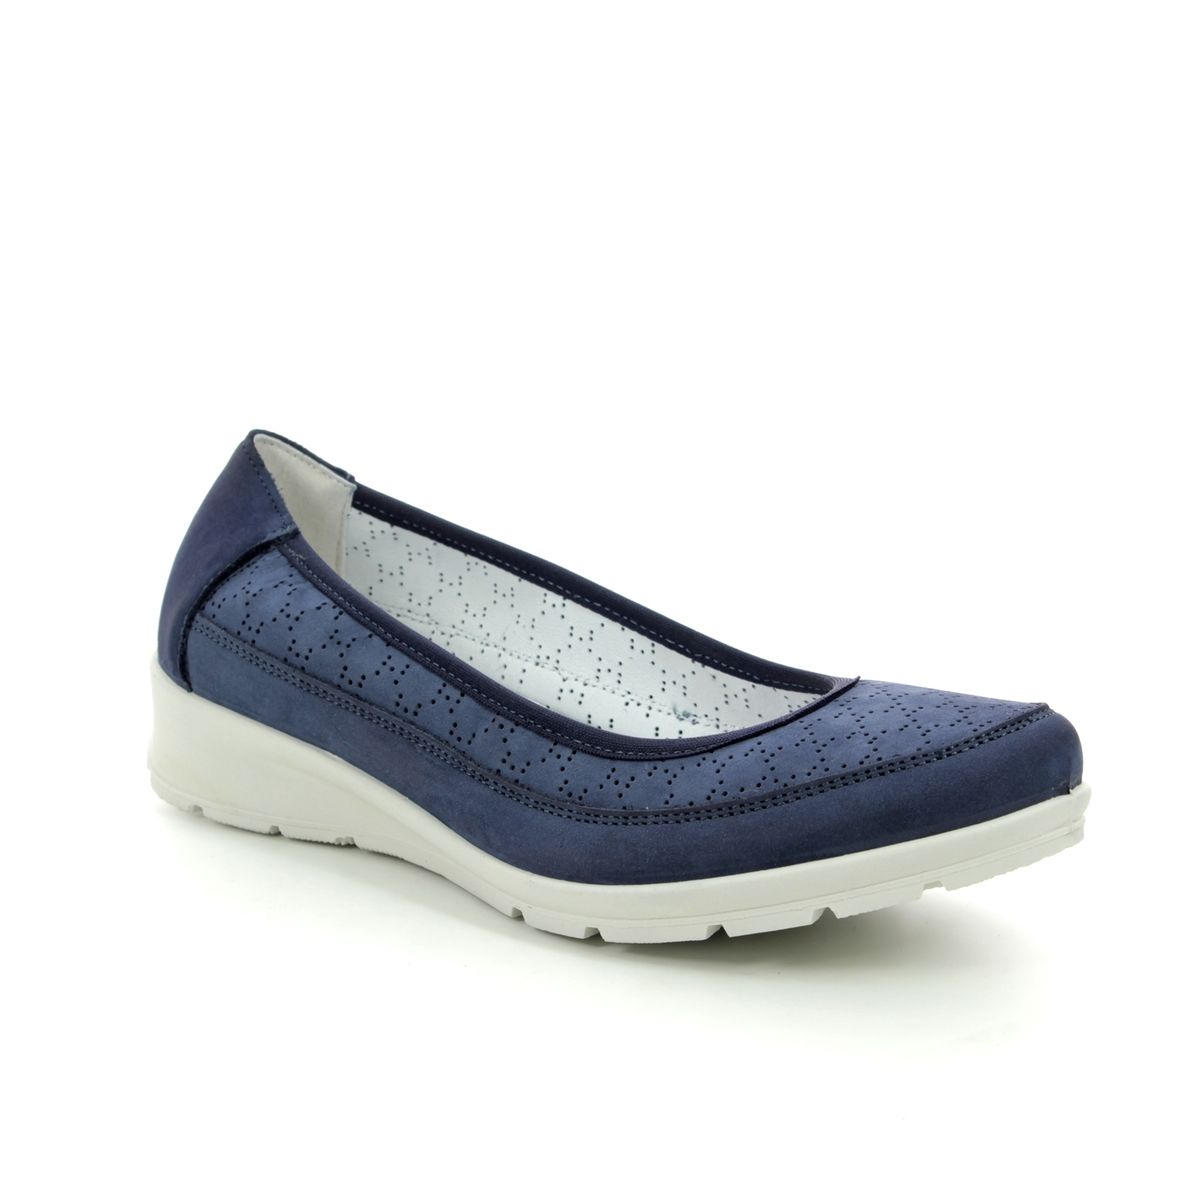 IMAC Kristaperf Navy Nubuck Womens pumps 6170-30023009 in a Plain Leather in Size 40